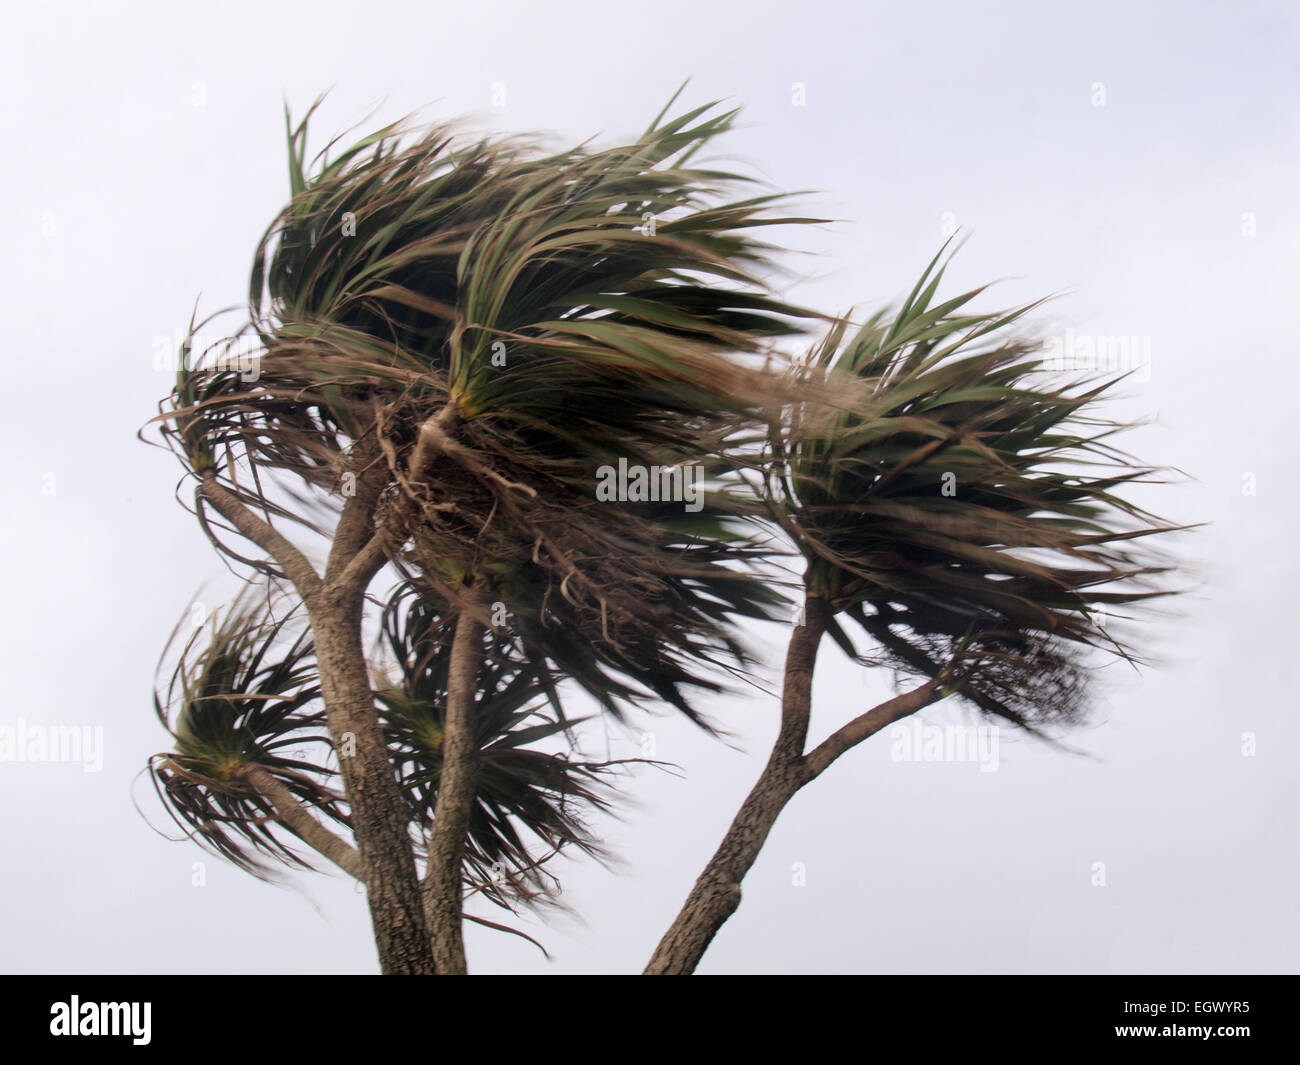 Palm trees blowing in strong winds, Woolacombe beach, Devon, UK Stock Photo